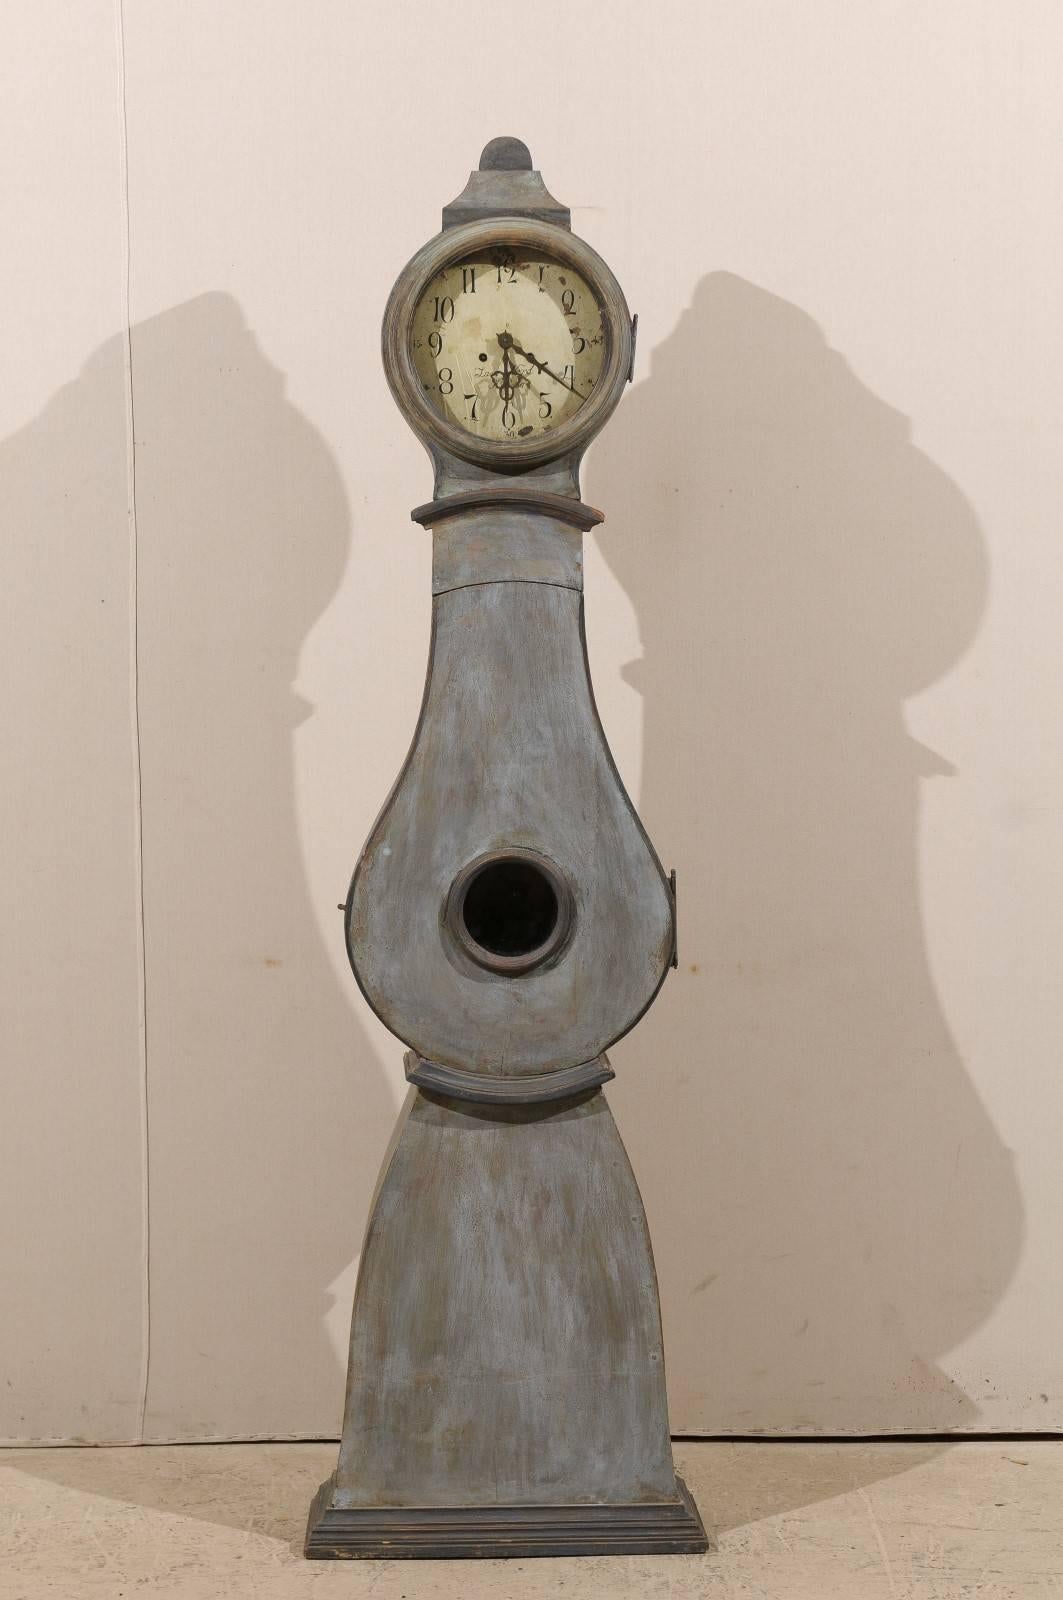 A 19th century Swedish clock. This Swedish clock has a nicely adorned crest and fluid curves throughout the head and body. This clock retains it's original metal face, hands and movement.  The tear drop single-hinged door opens from left to right